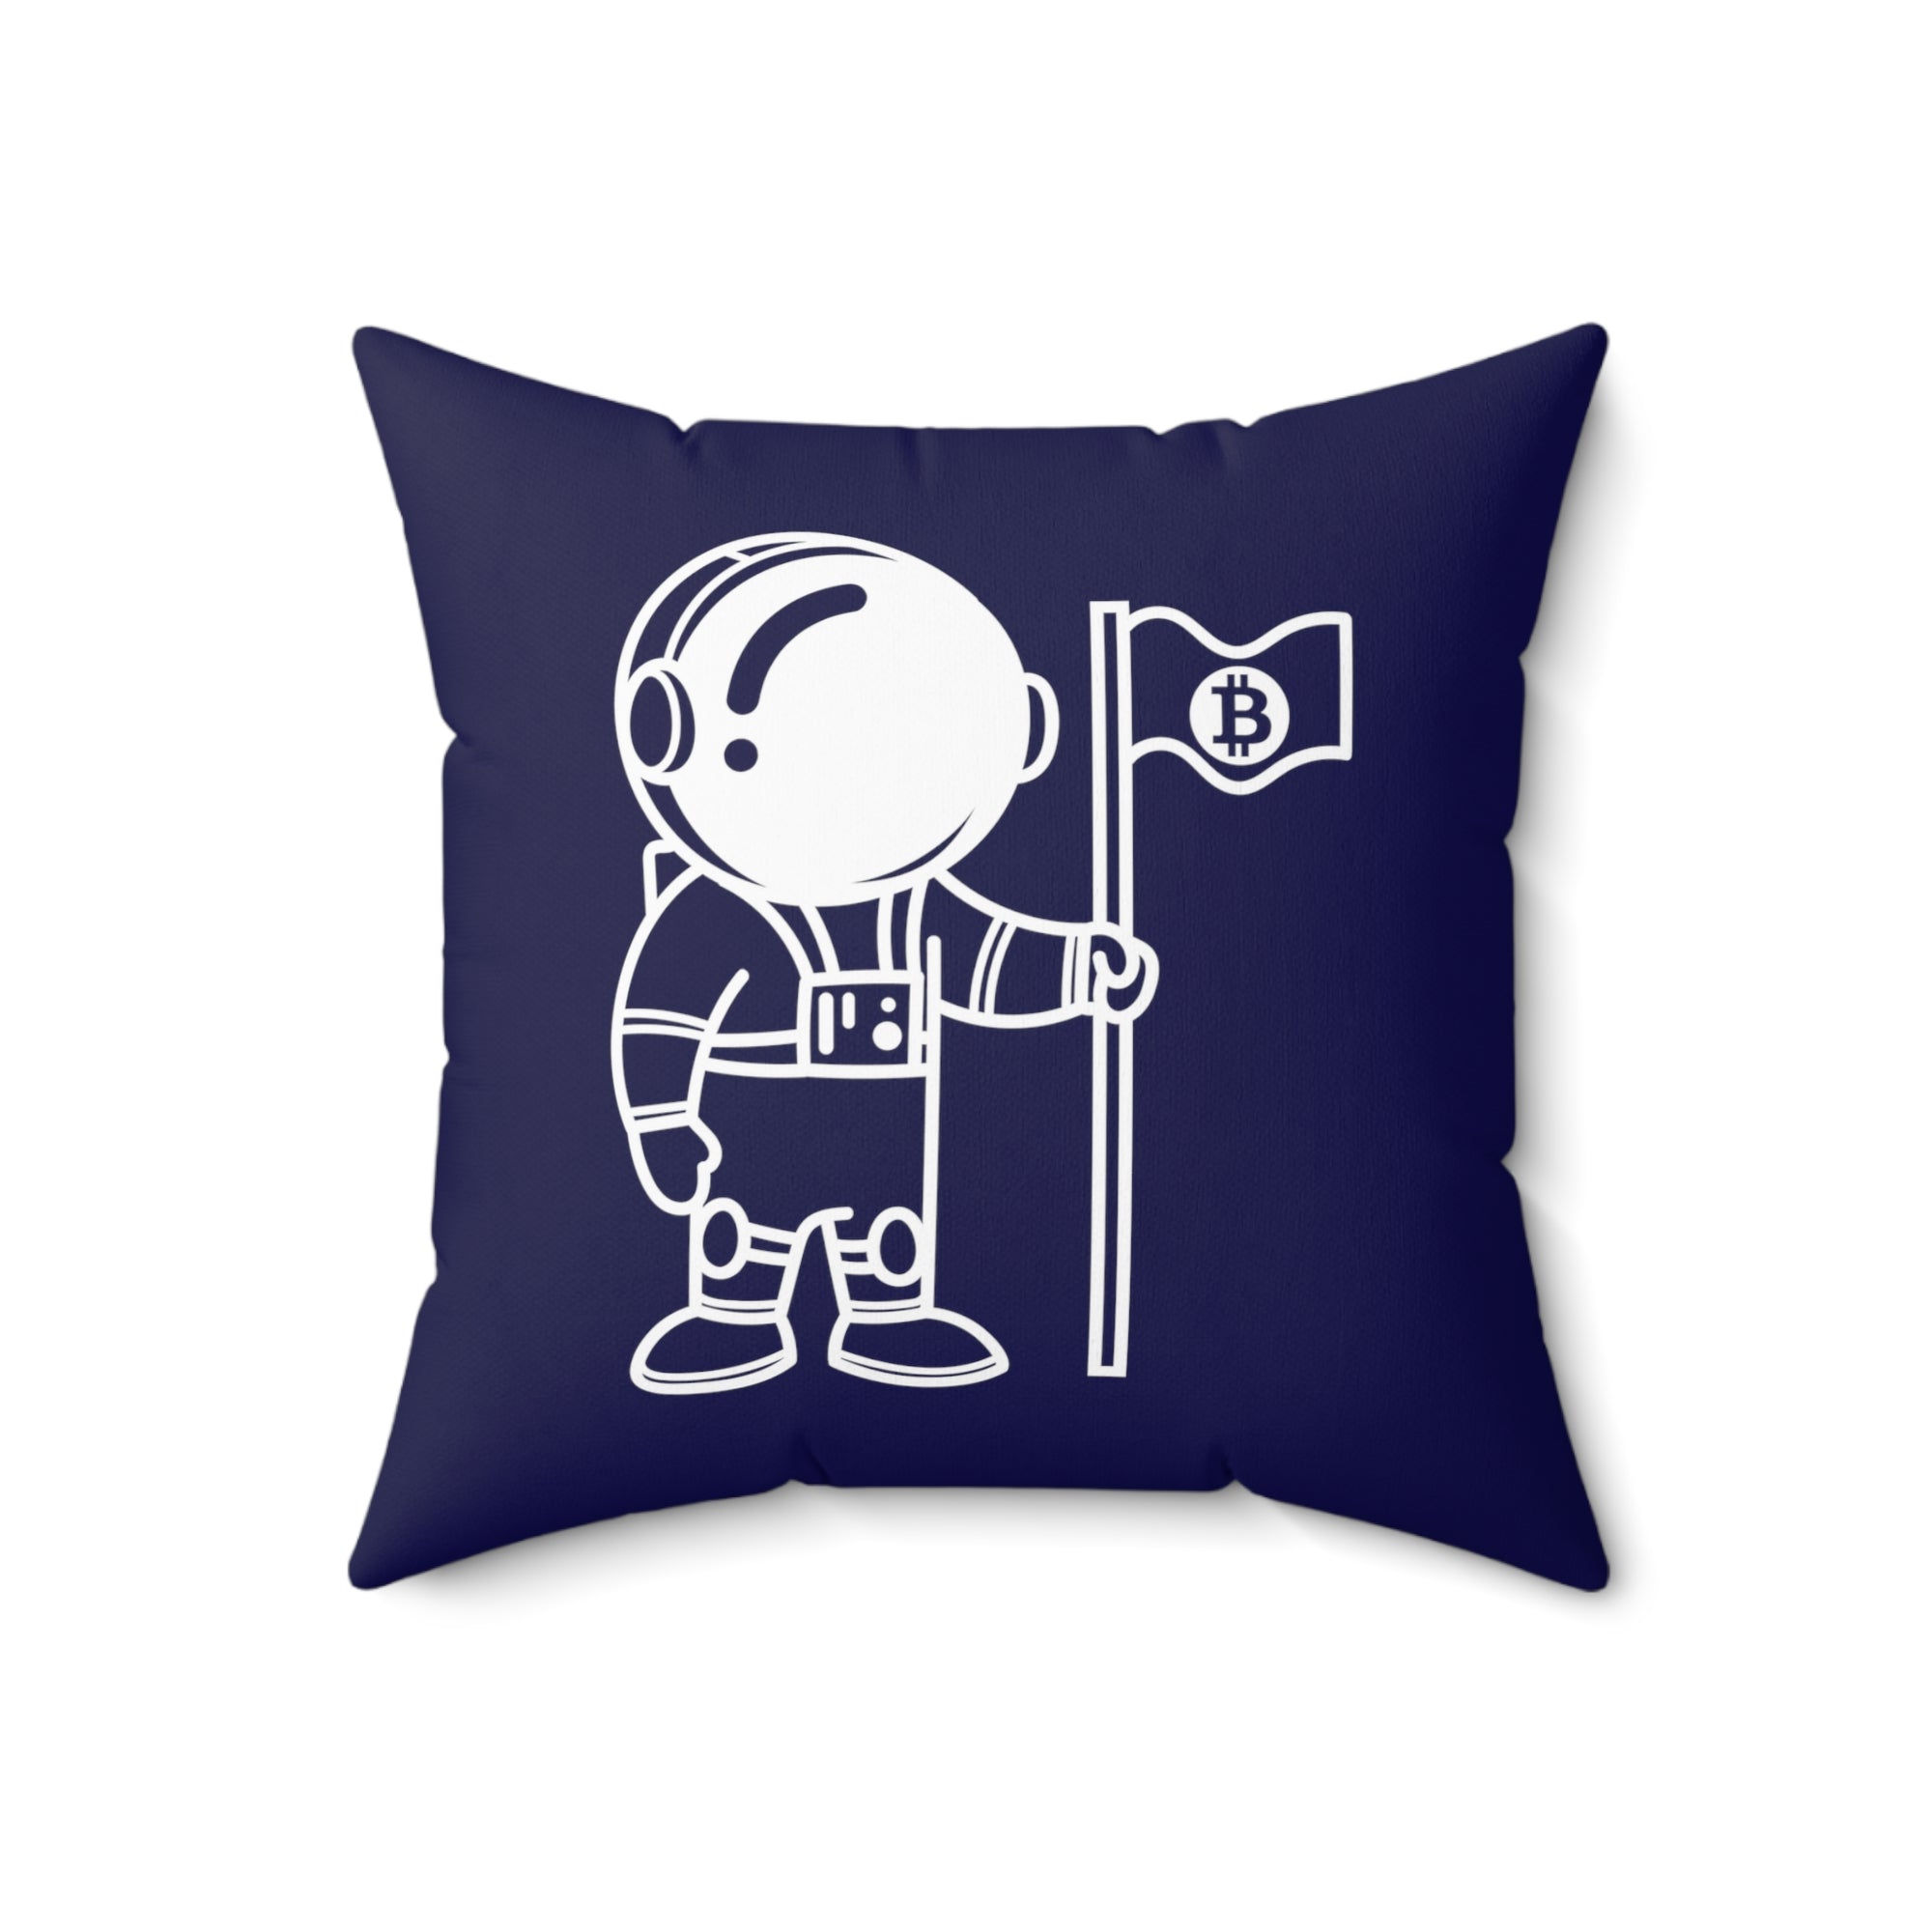 Bitcoin Merchandise - Bitcoin To The Moon Pillow. Close Up View.